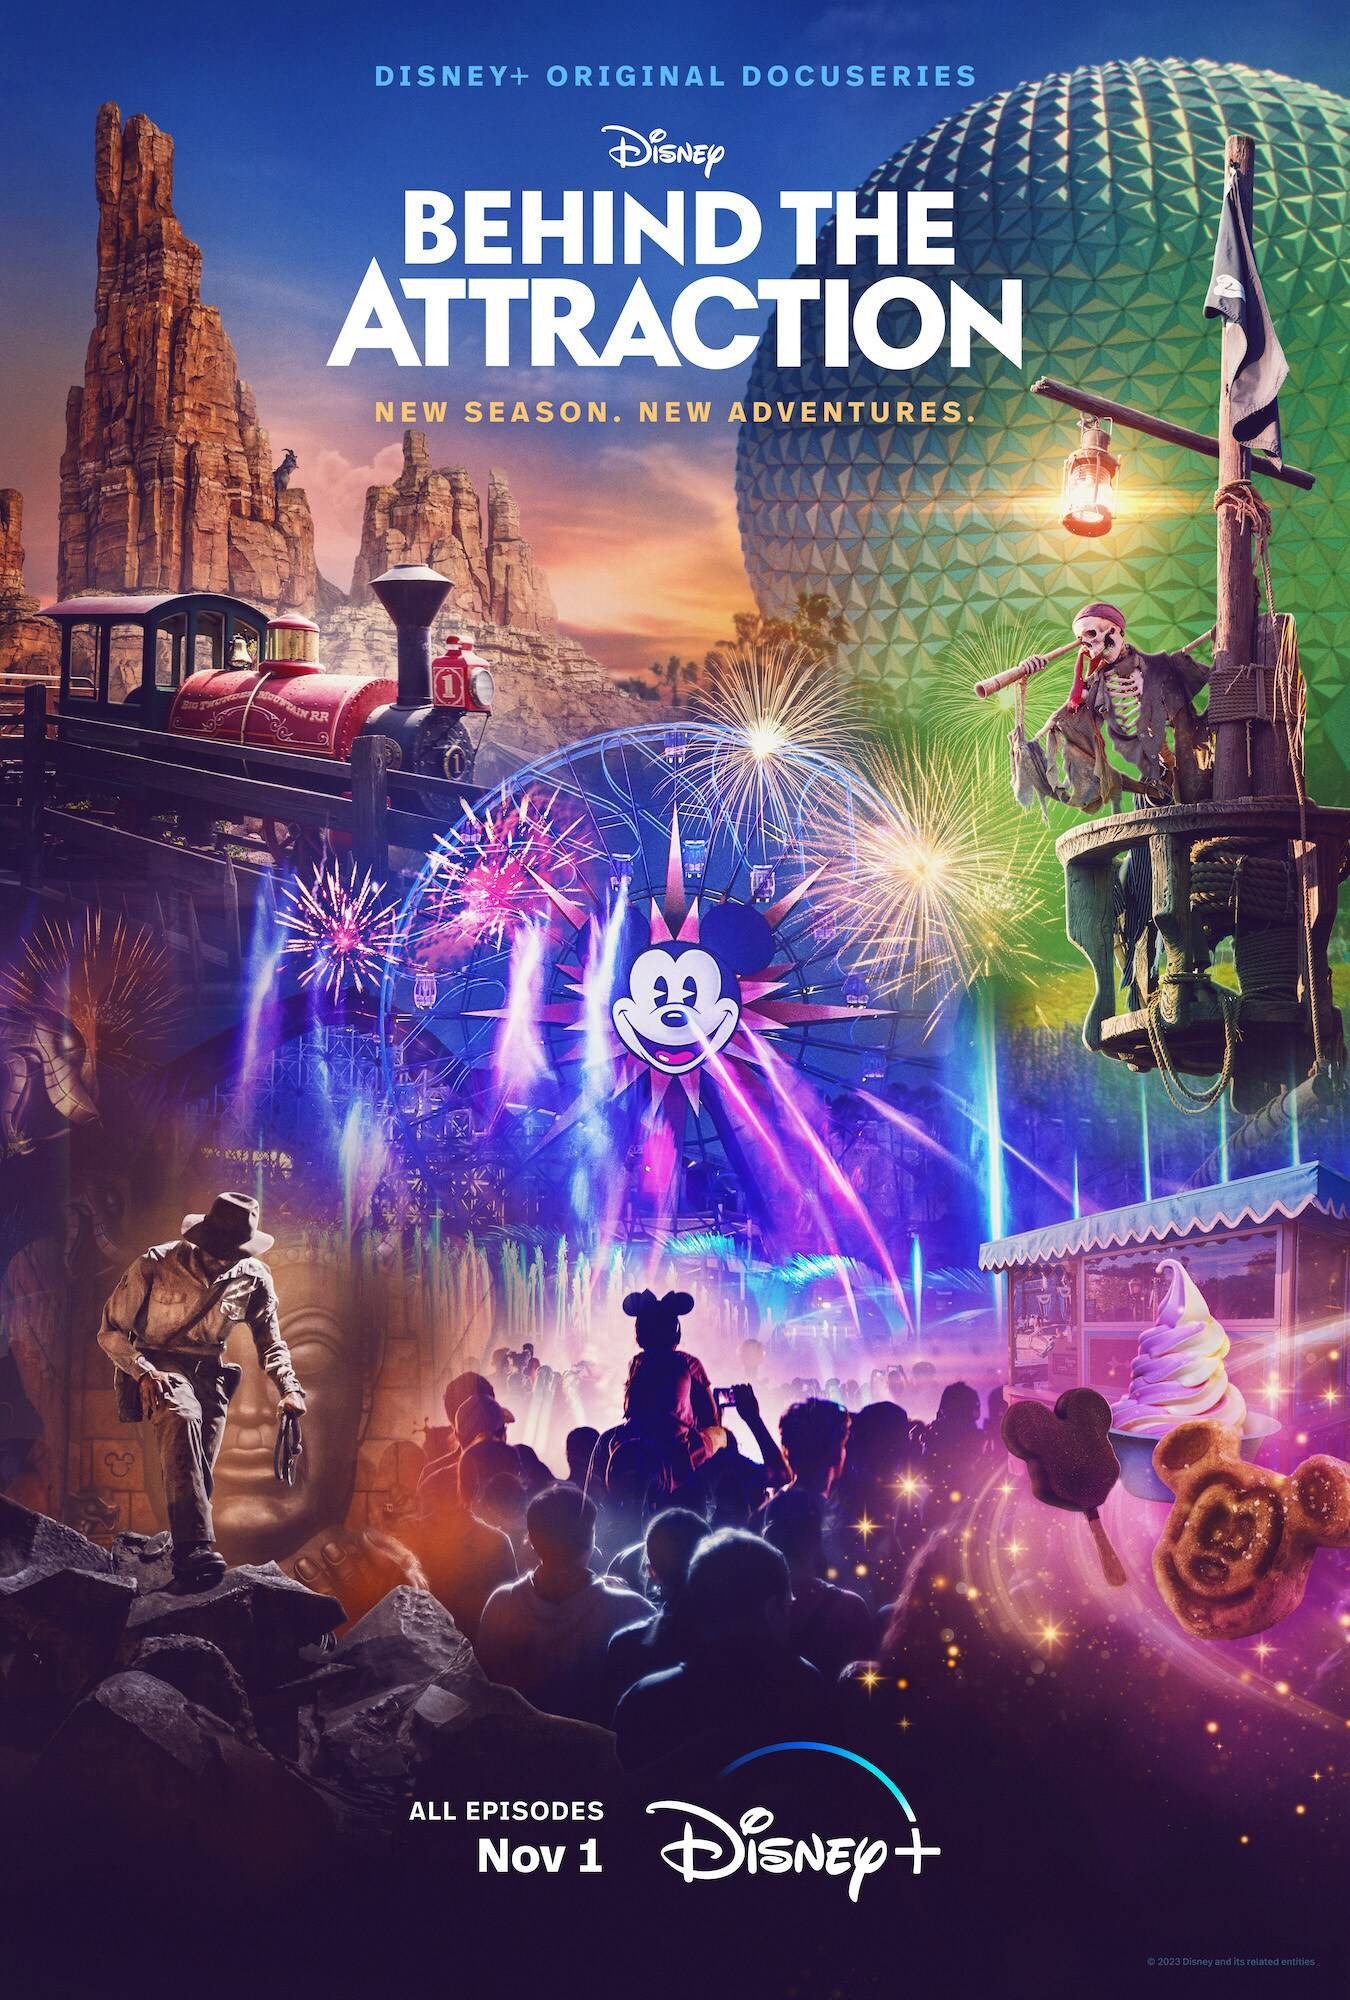 Behind the Attraction Season 2